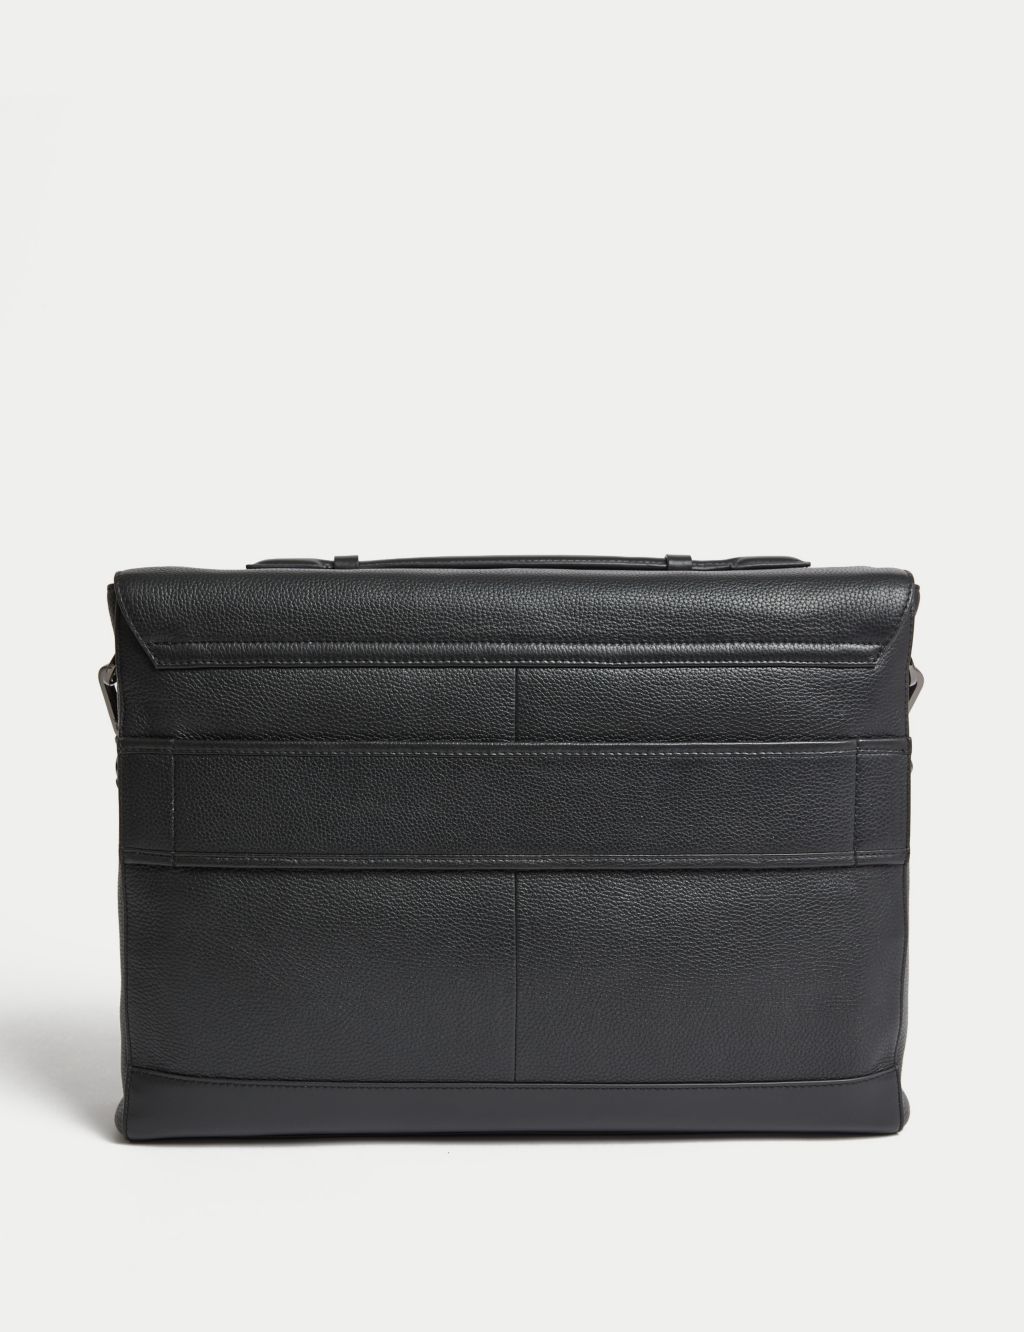 Leather Briefcase image 3